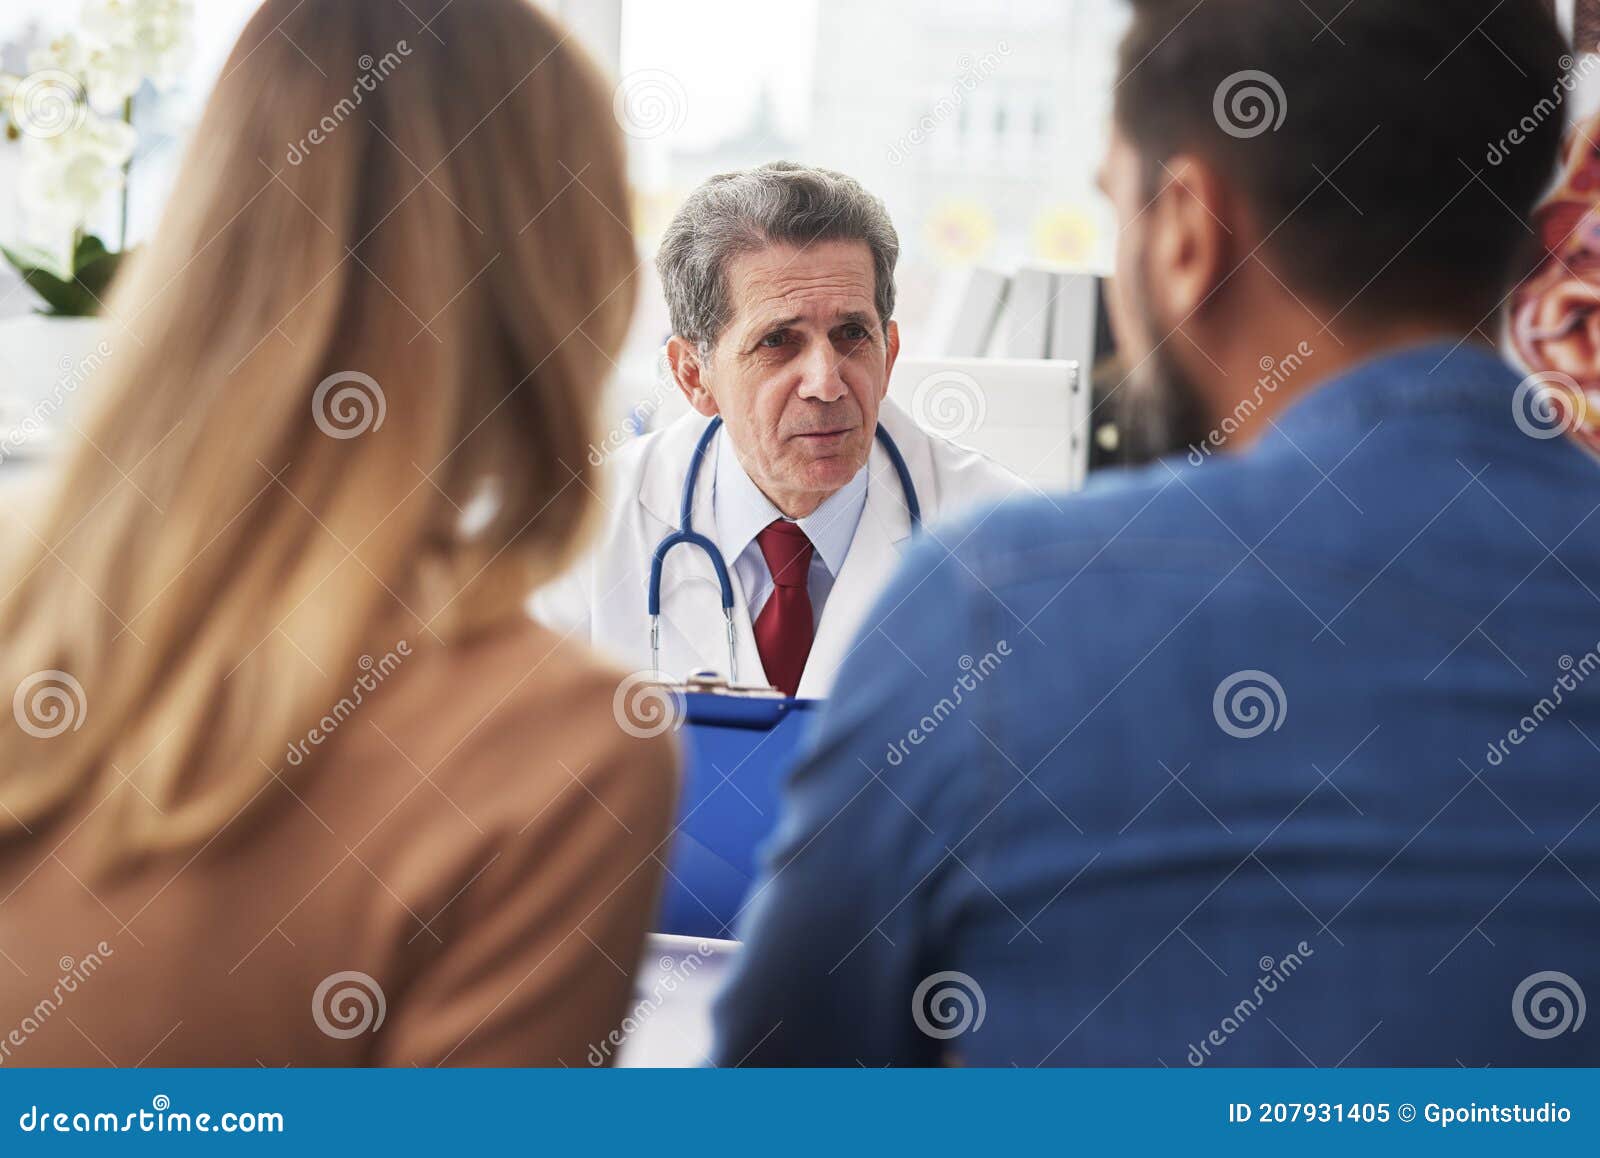 young couple talking with gynecologist in doctorÃ¢â¬â¢s office